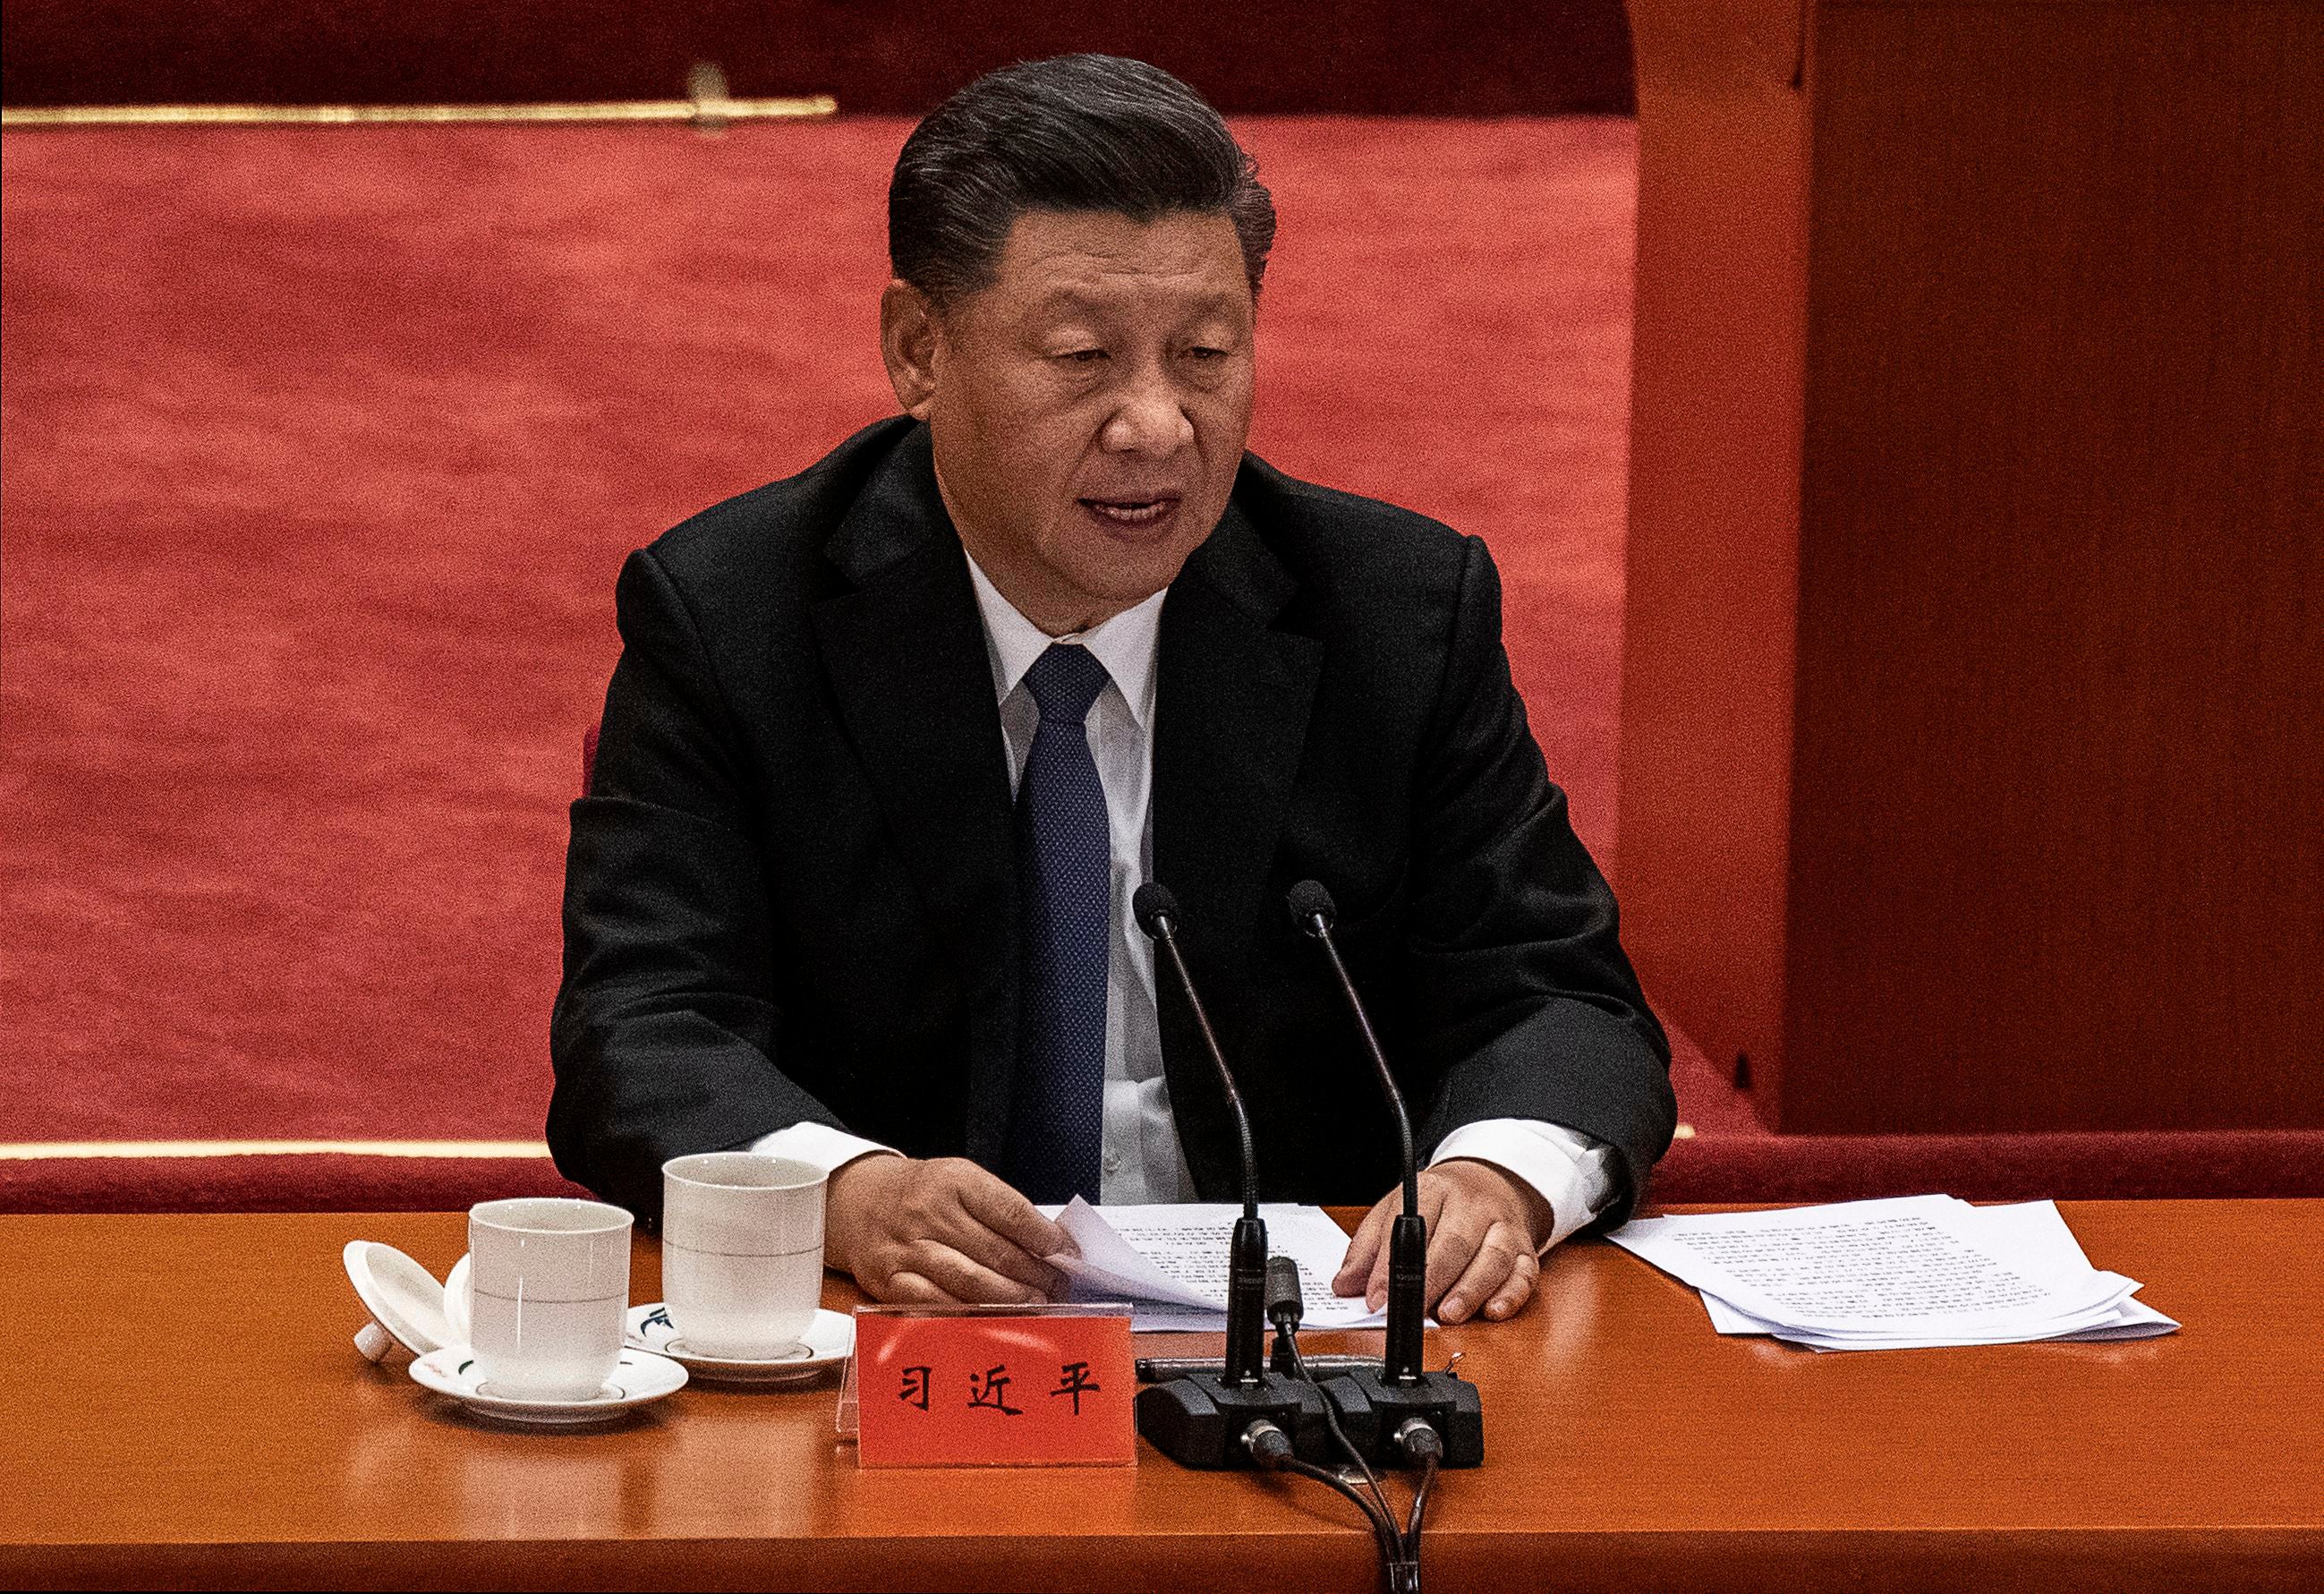 Ultimately Europe cannot side with president Xi Jinping’s China against the US but it will seek to distance itself from some assets of American policy as far as it can